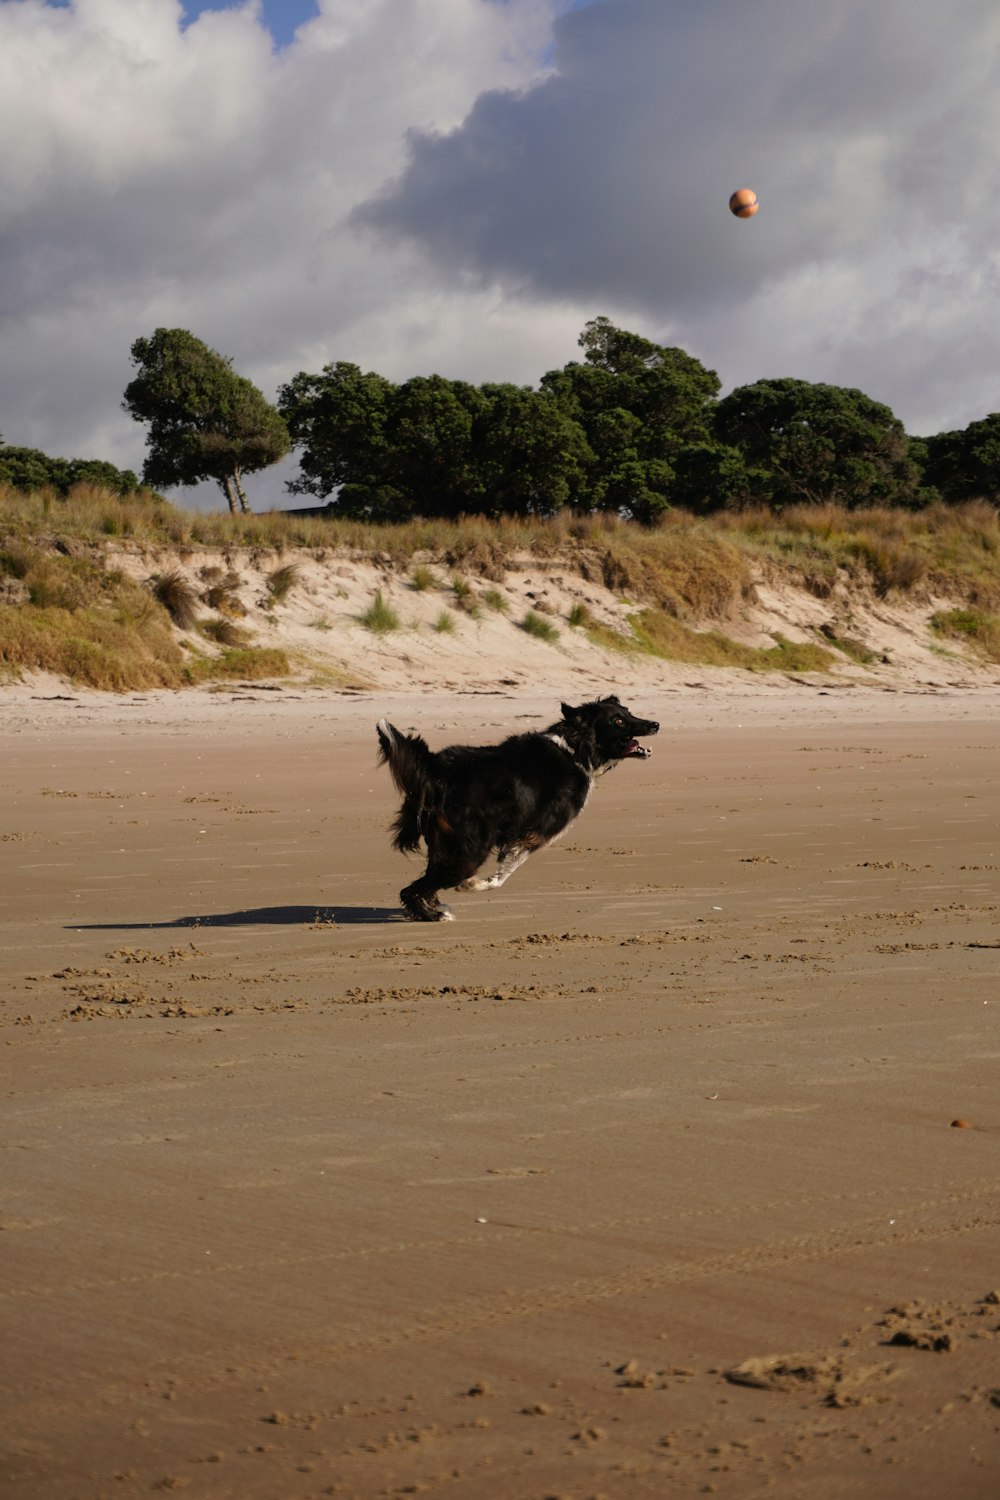 a dog running on a beach with a ball in the air